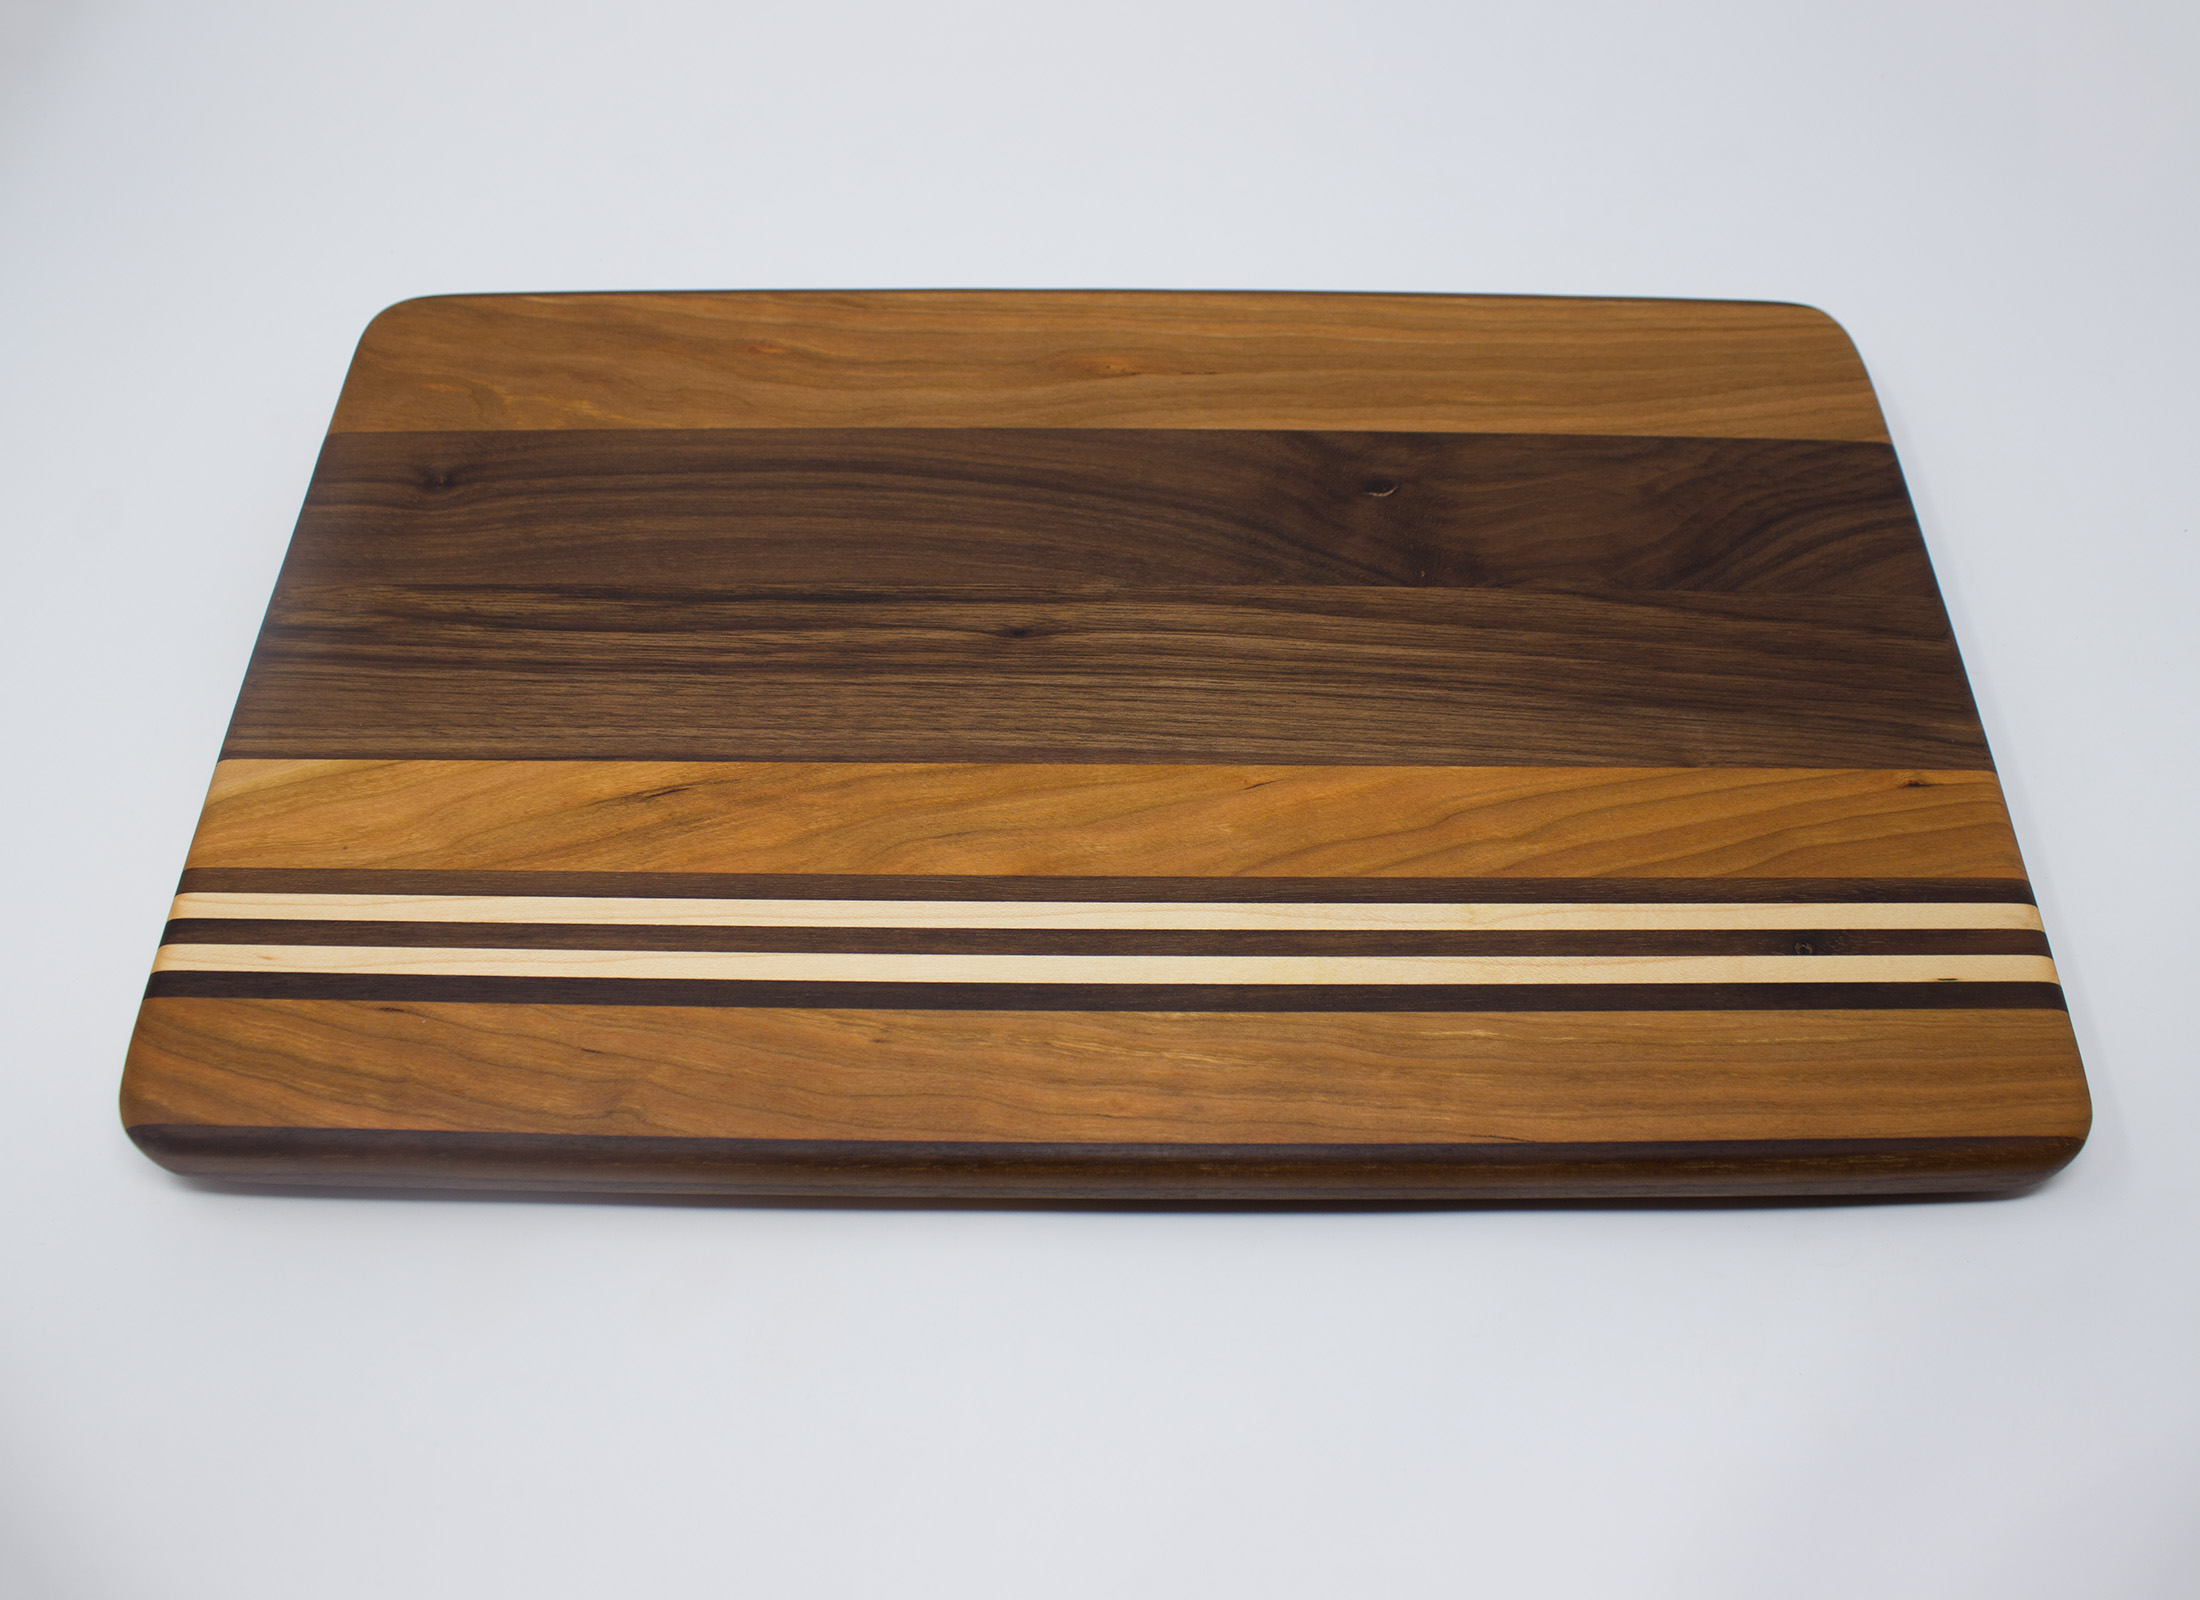 https://www.rockfordwoodcrafts.com/wp-content/uploads/Cherry-Walnut-and-Maple-with-Offset-Stripes-Cutting-Board-Front.jpg